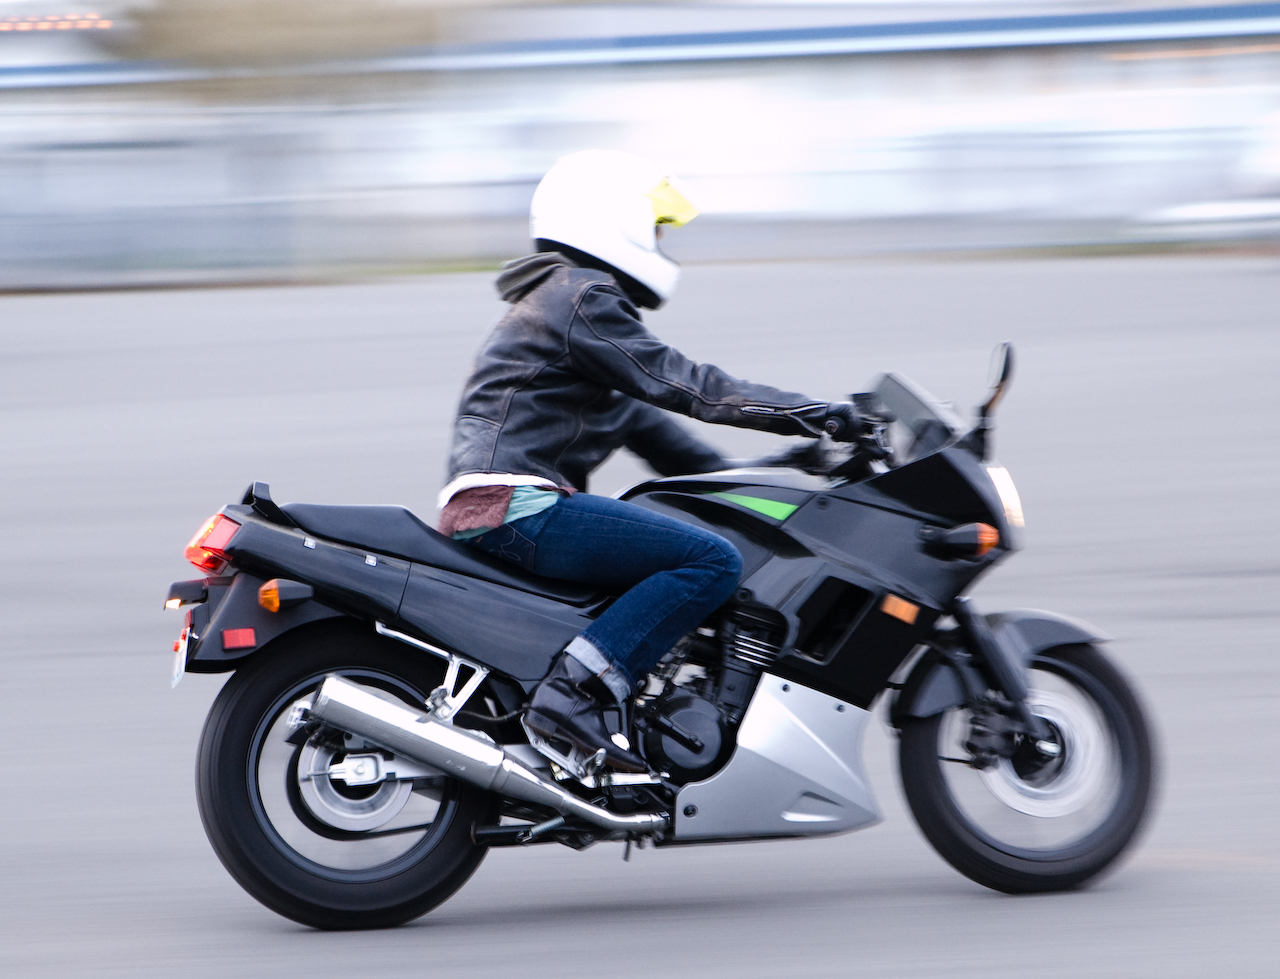 The Popularity of Street Bikes and Their Fuel Economy